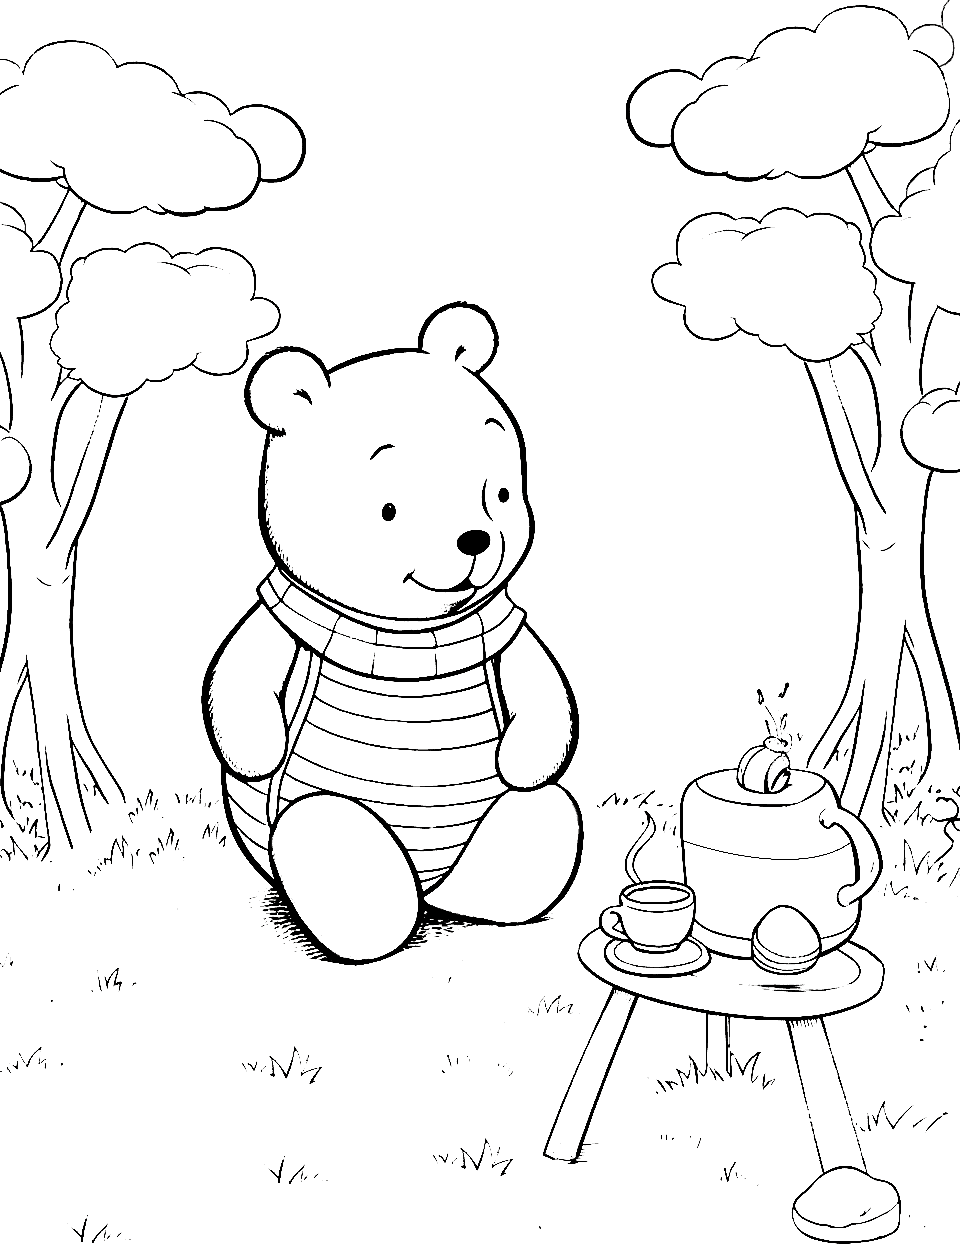 Pooh Picnic Coloring Page - A fun scene where Pooh is having a picnic.